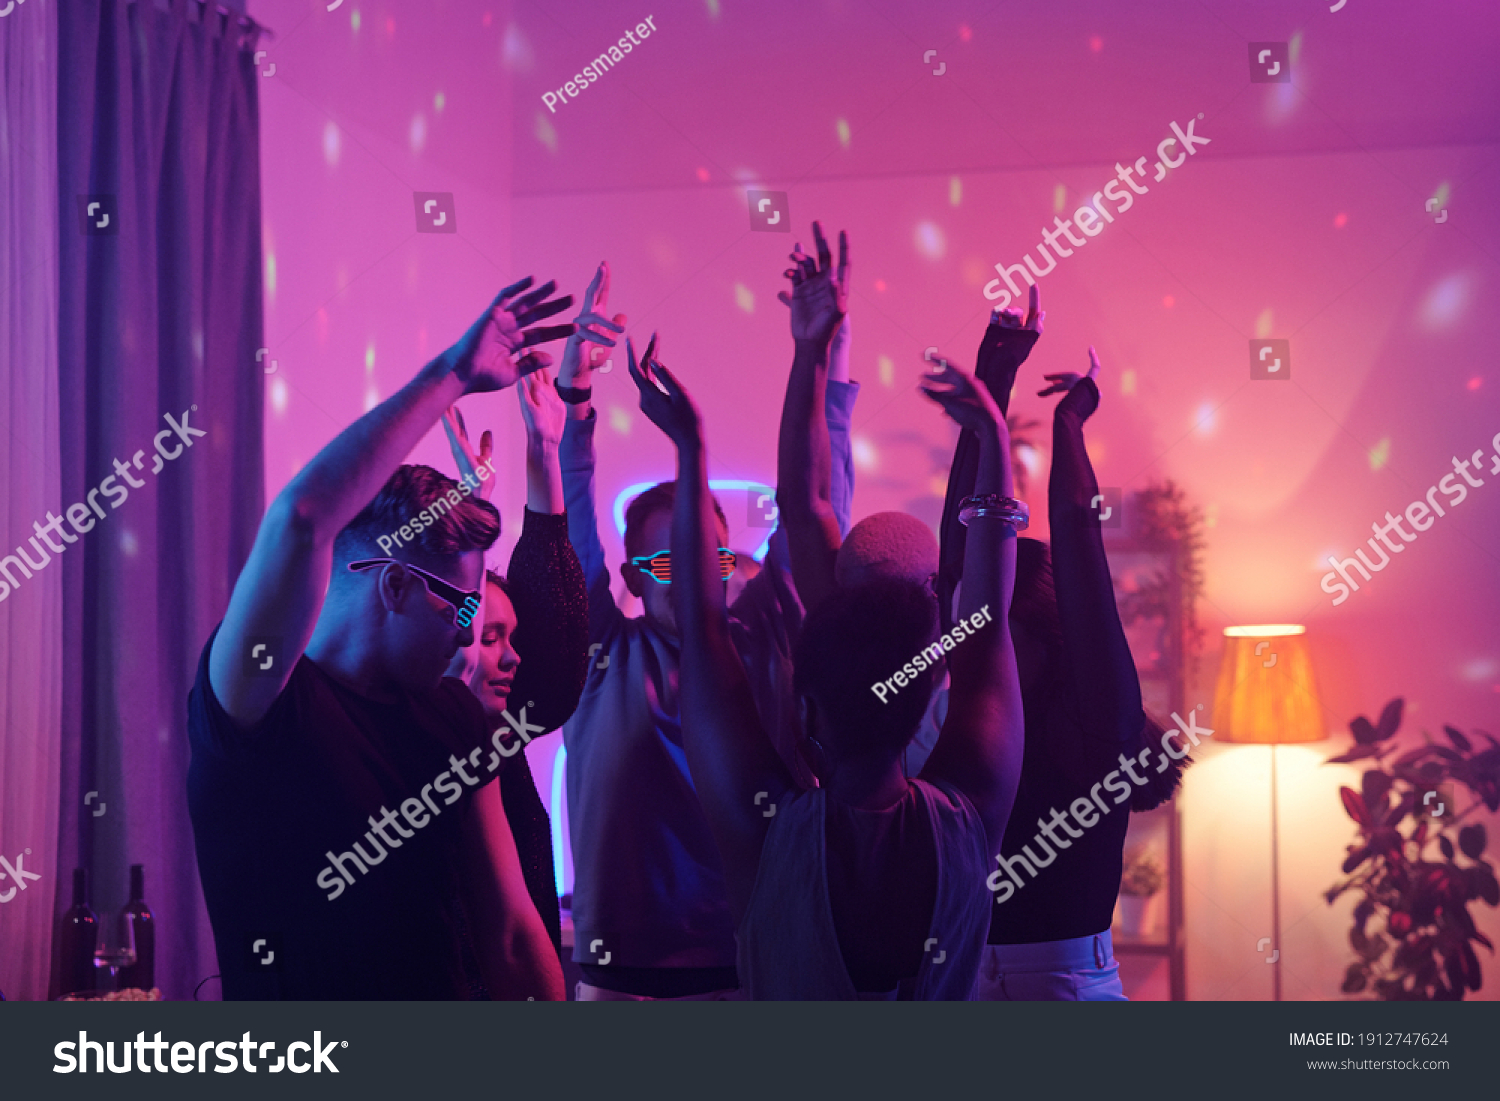 Young intercultural friends in smart casualwear raising arms while dancing together at home party in living-room illuminated with pink lighting #1912747624